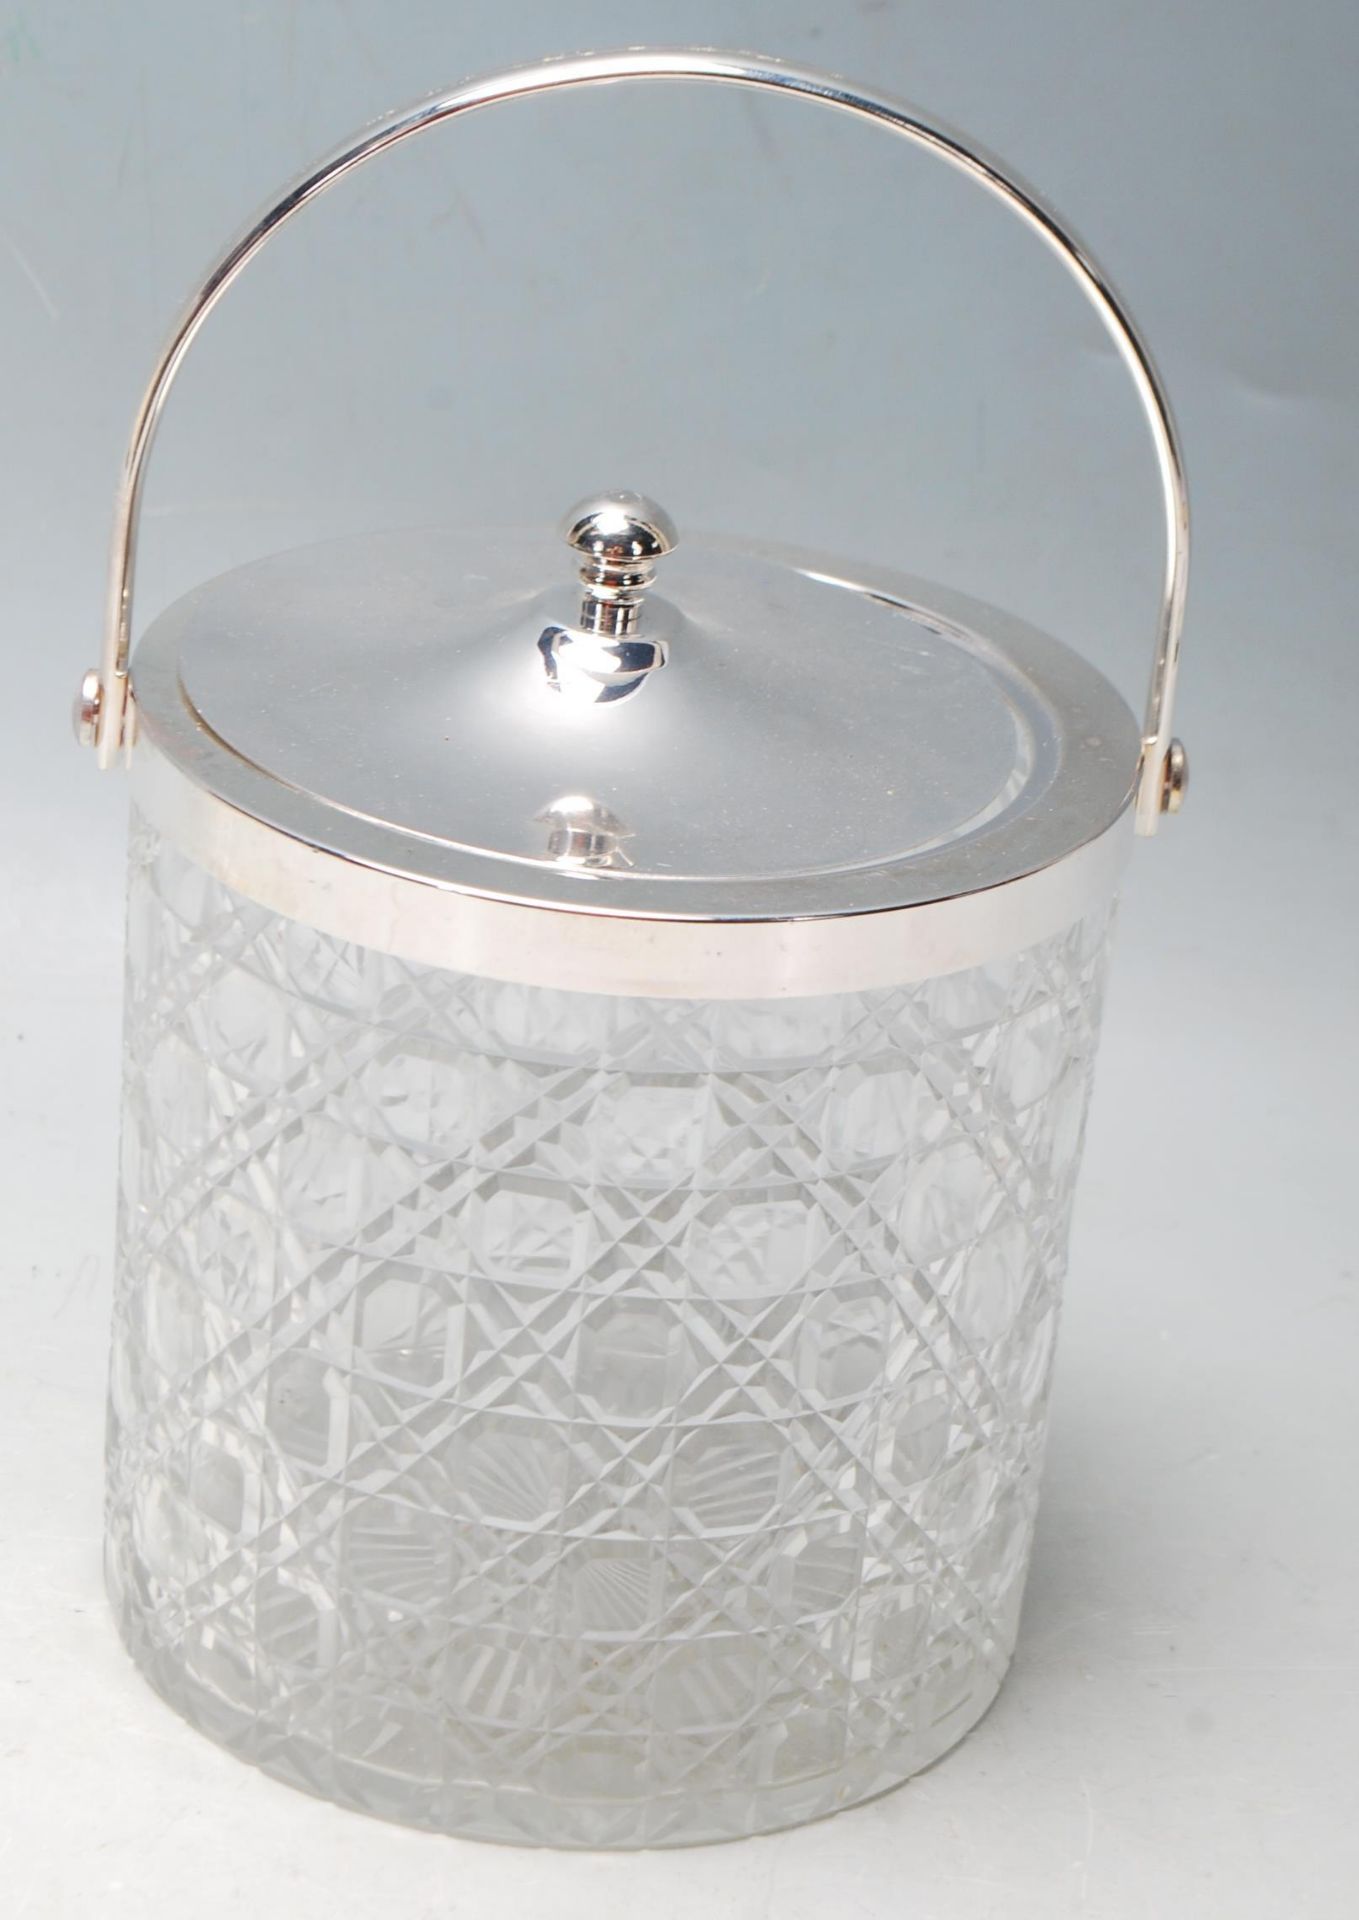 CUT GLASS AND SILVER PLATED BISCUIT JAR - Image 5 of 5